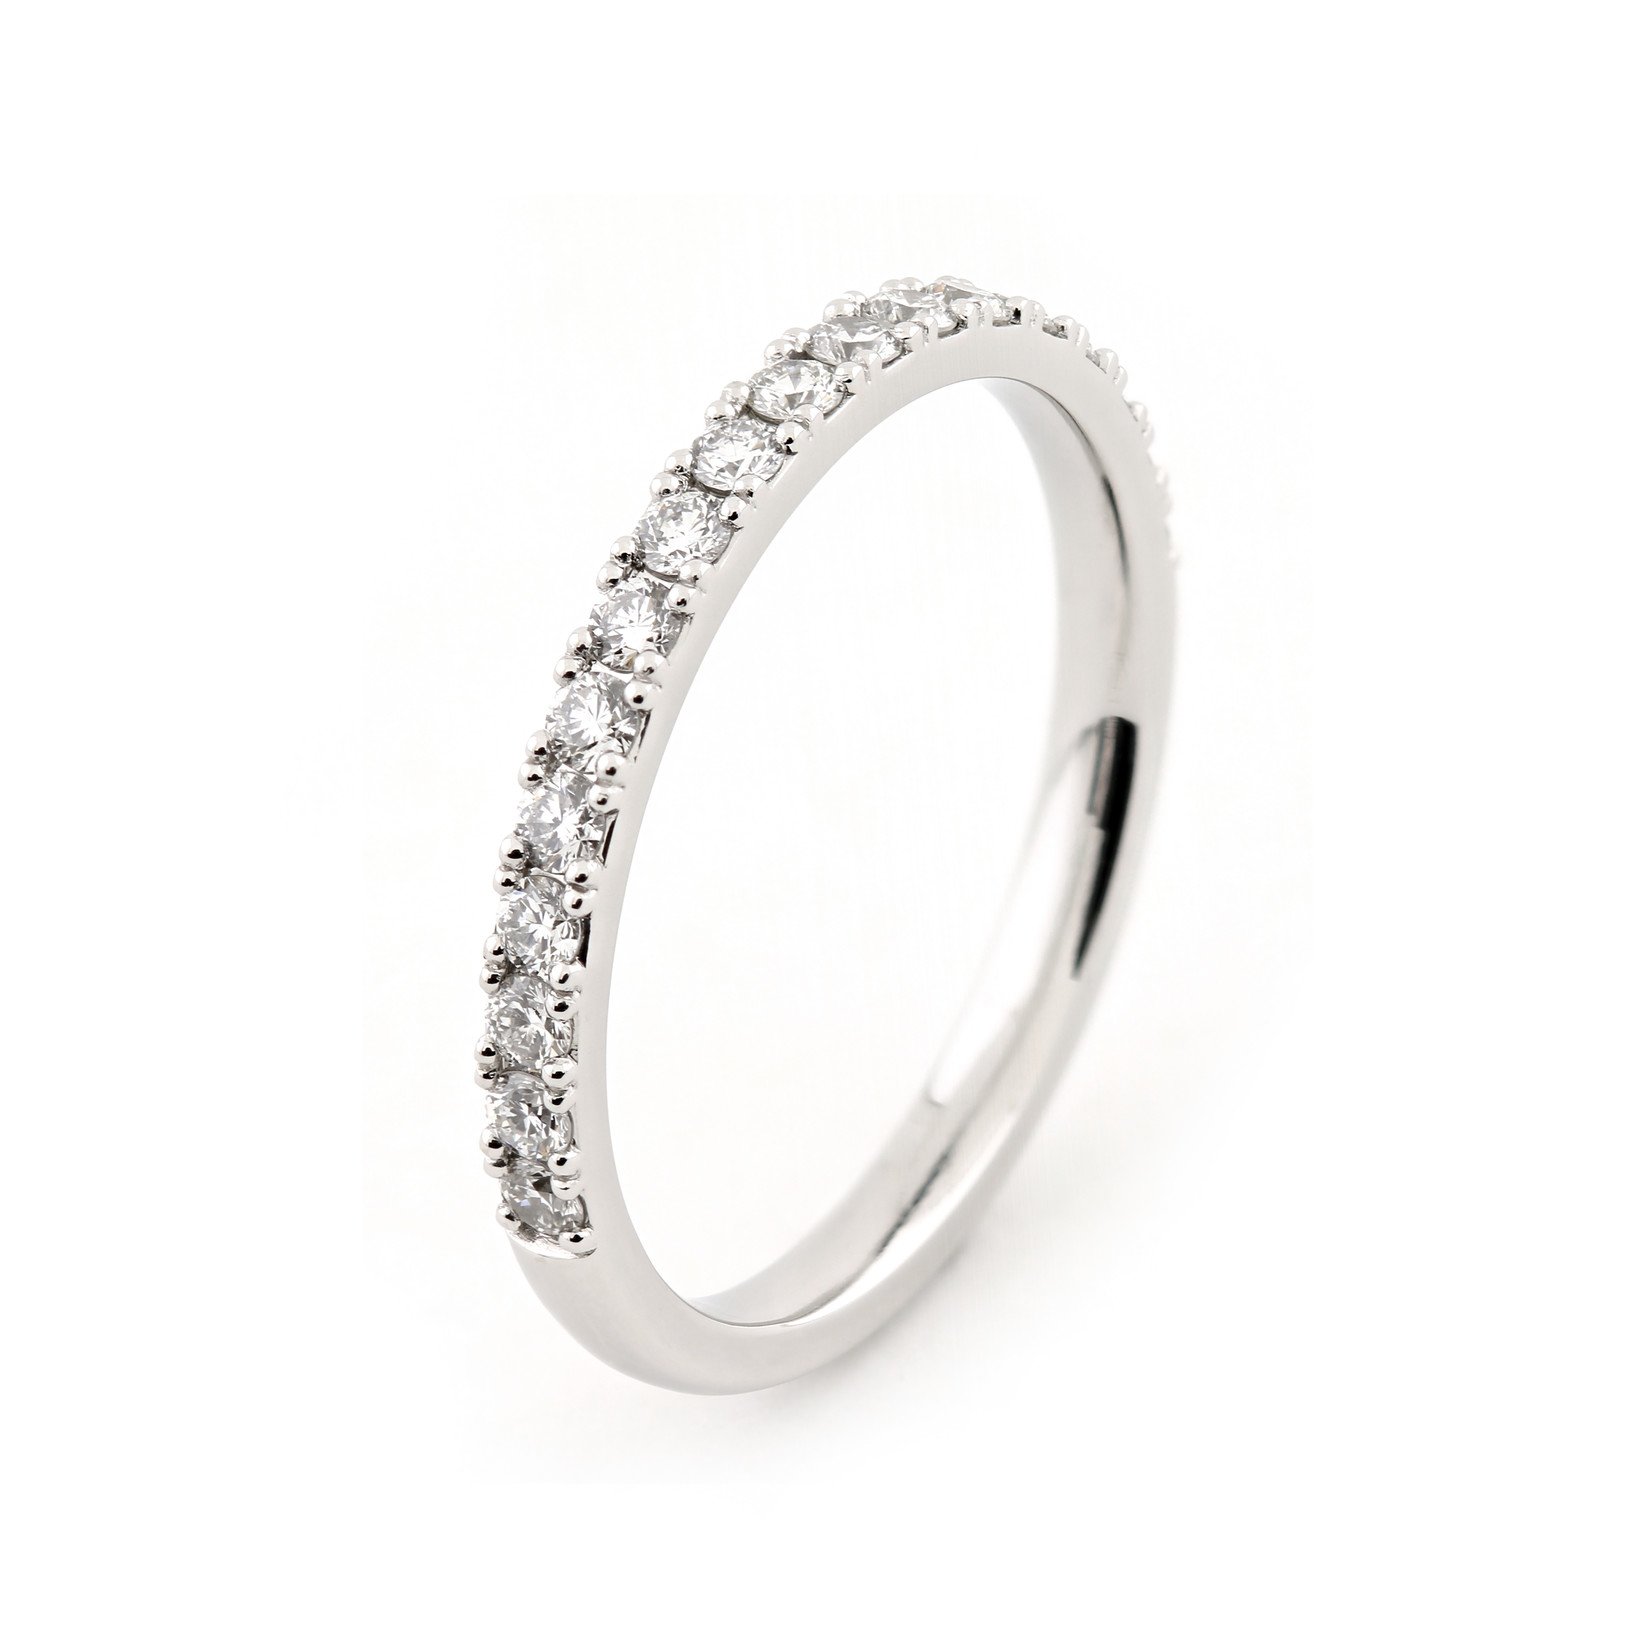 Baxter Moerman Ava Anniversary Band - 2mm Wide in Platinum